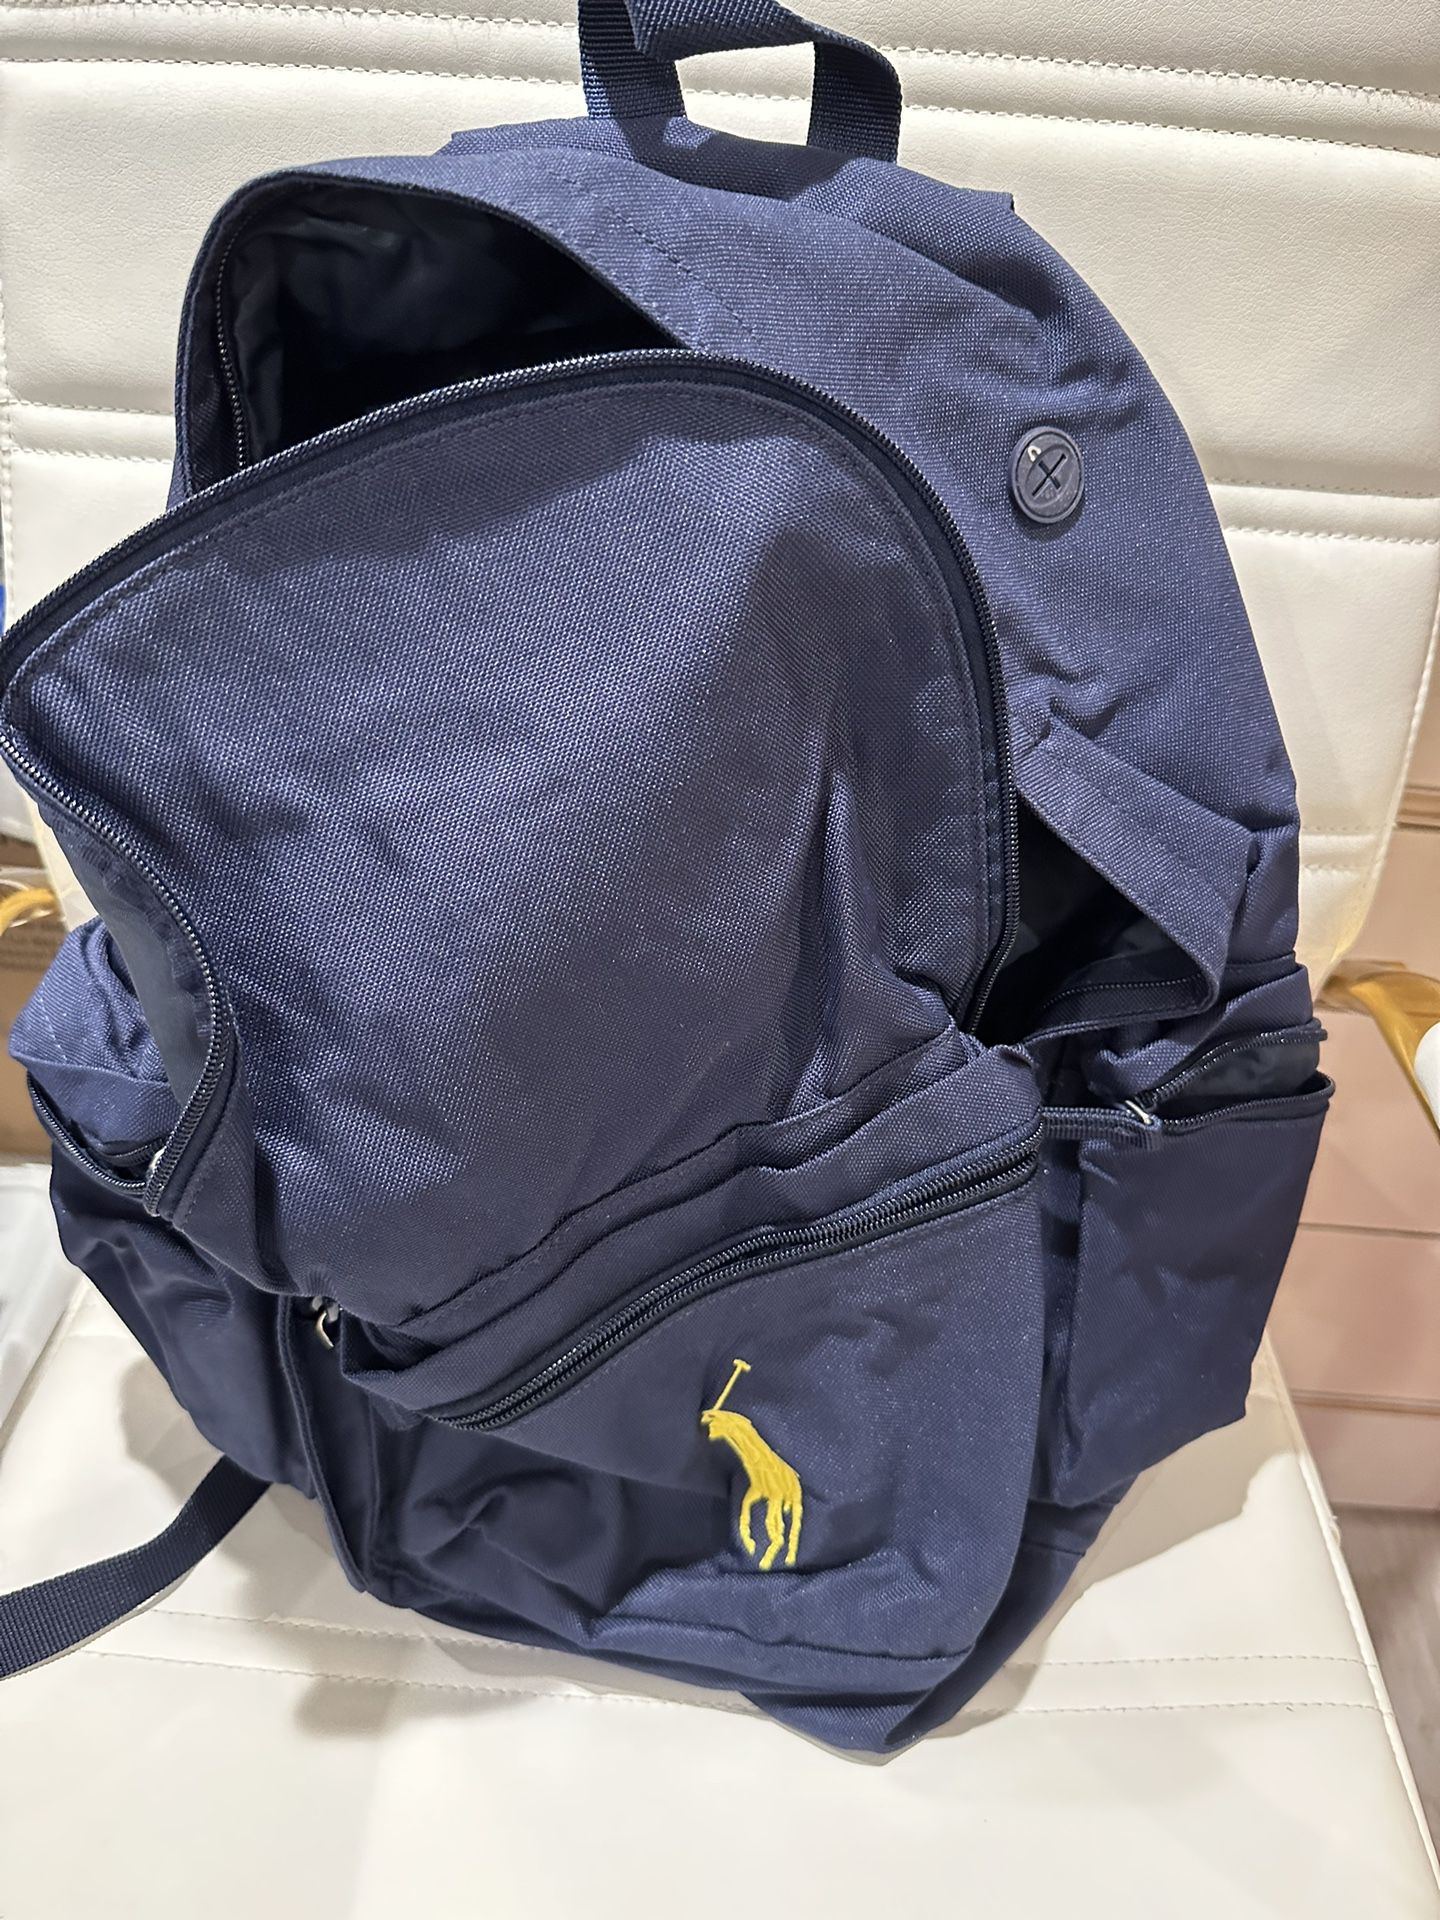 Ralph Lauren Backpack for Sale in Great Neck, NY - OfferUp